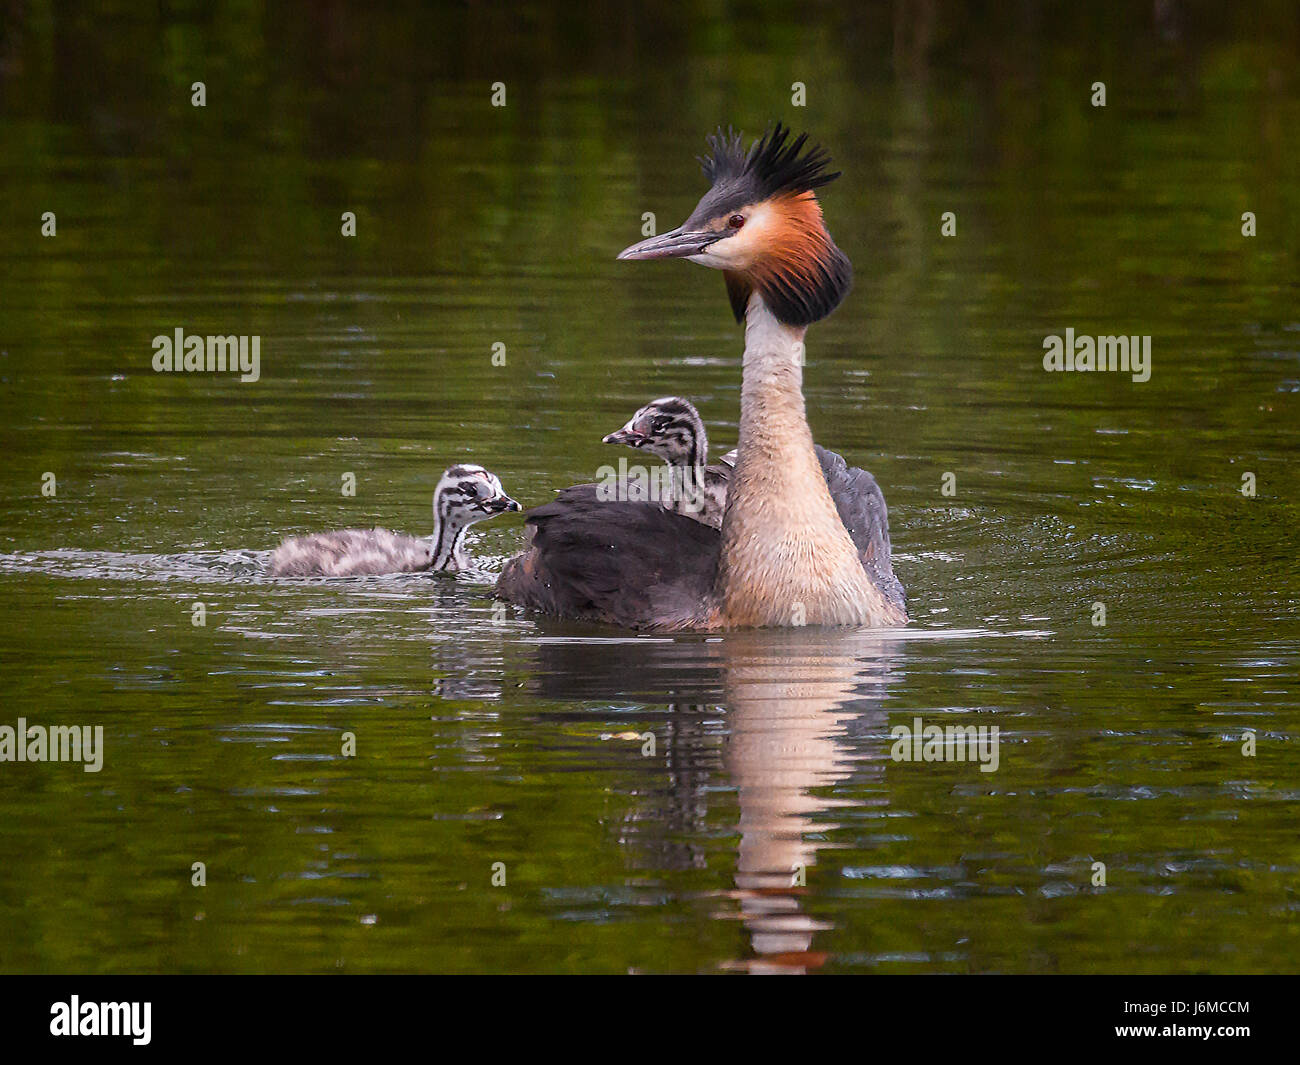 Great Crested Grebe family with chick riding on parent's back, chic swimming in pond Stock Photo